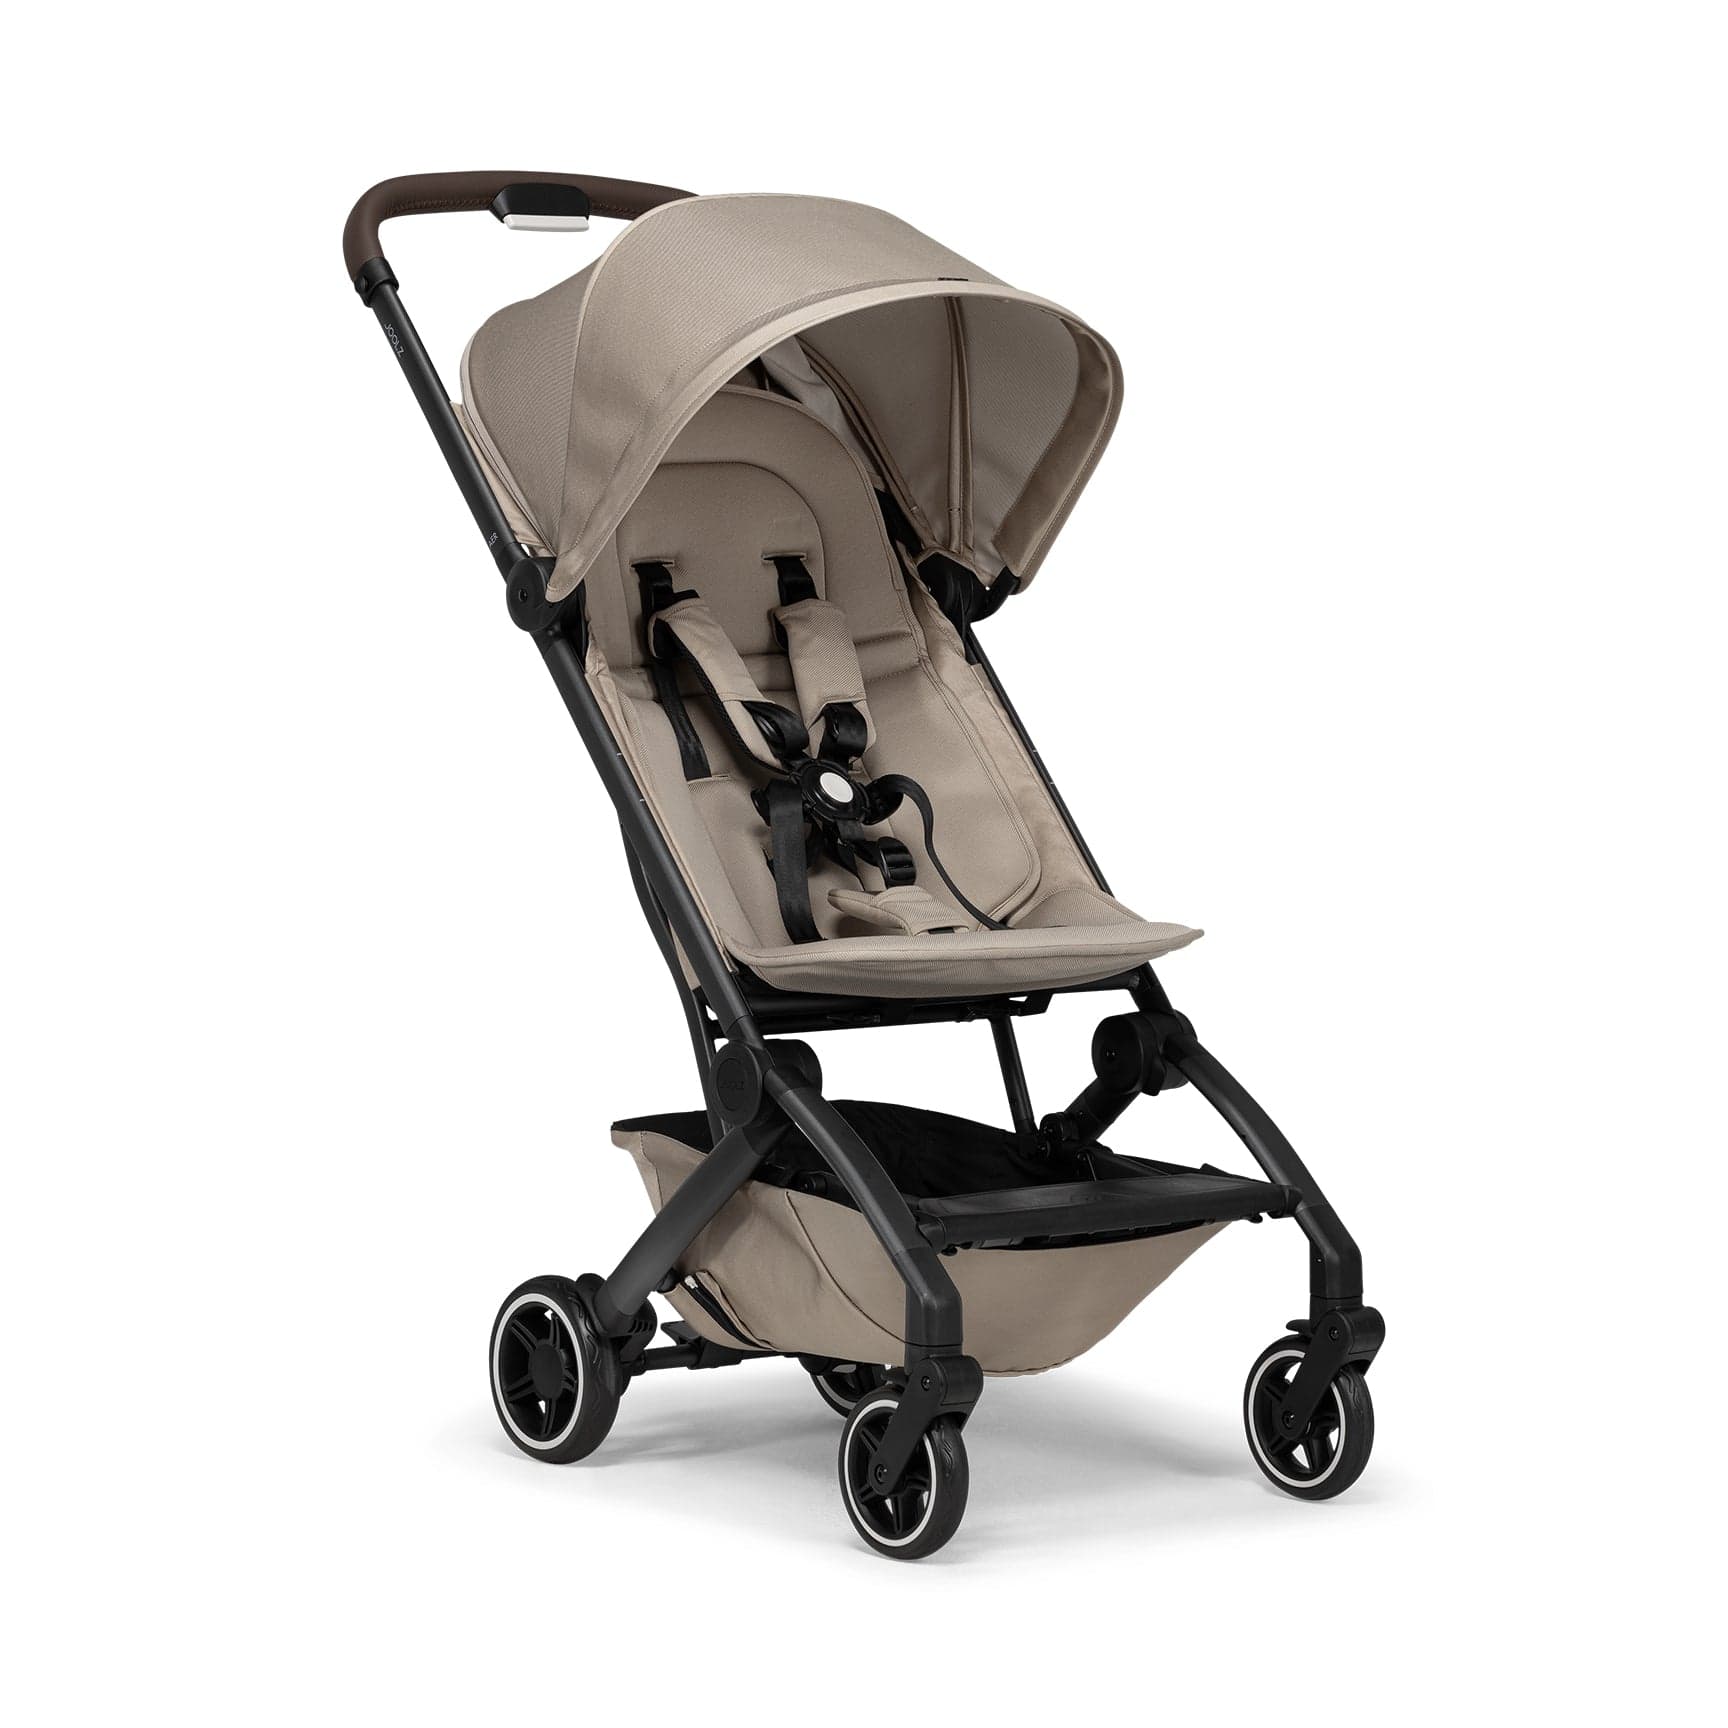 Joolz Aer+ Buggy Lovely Taupe Pushchairs & Buggies 310092 8715688075043